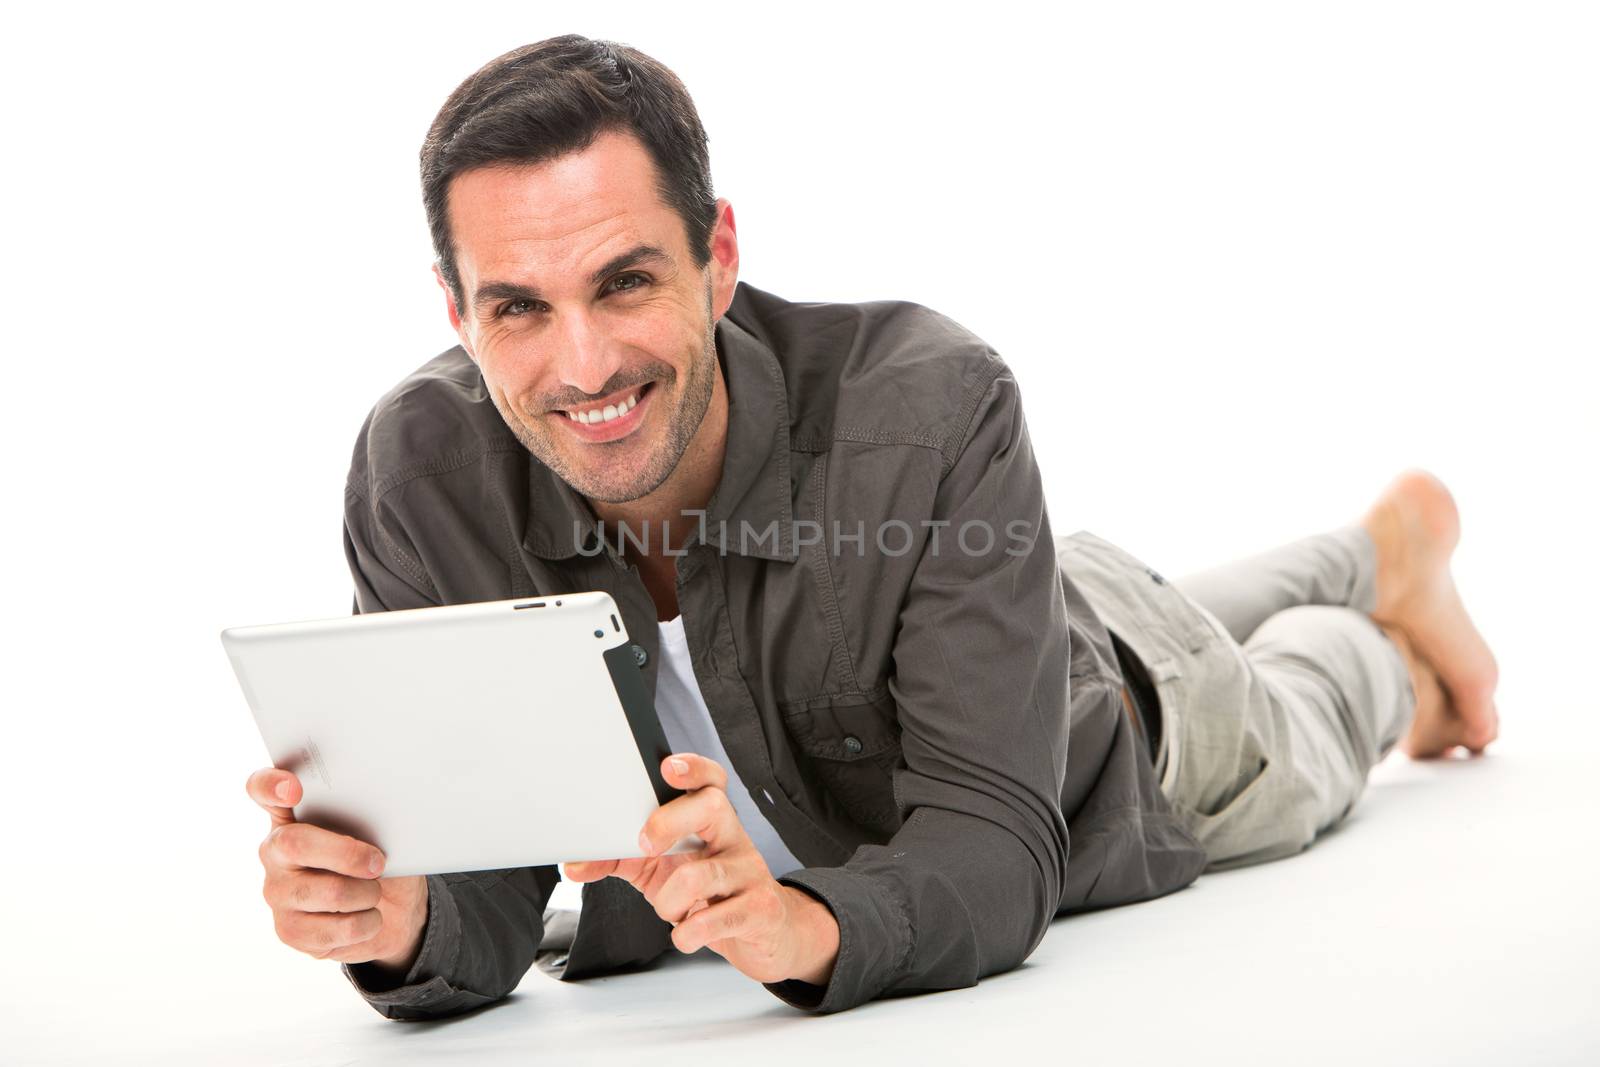 Man laying on the floor, smiling at camera and holding his digital tablet with both hands